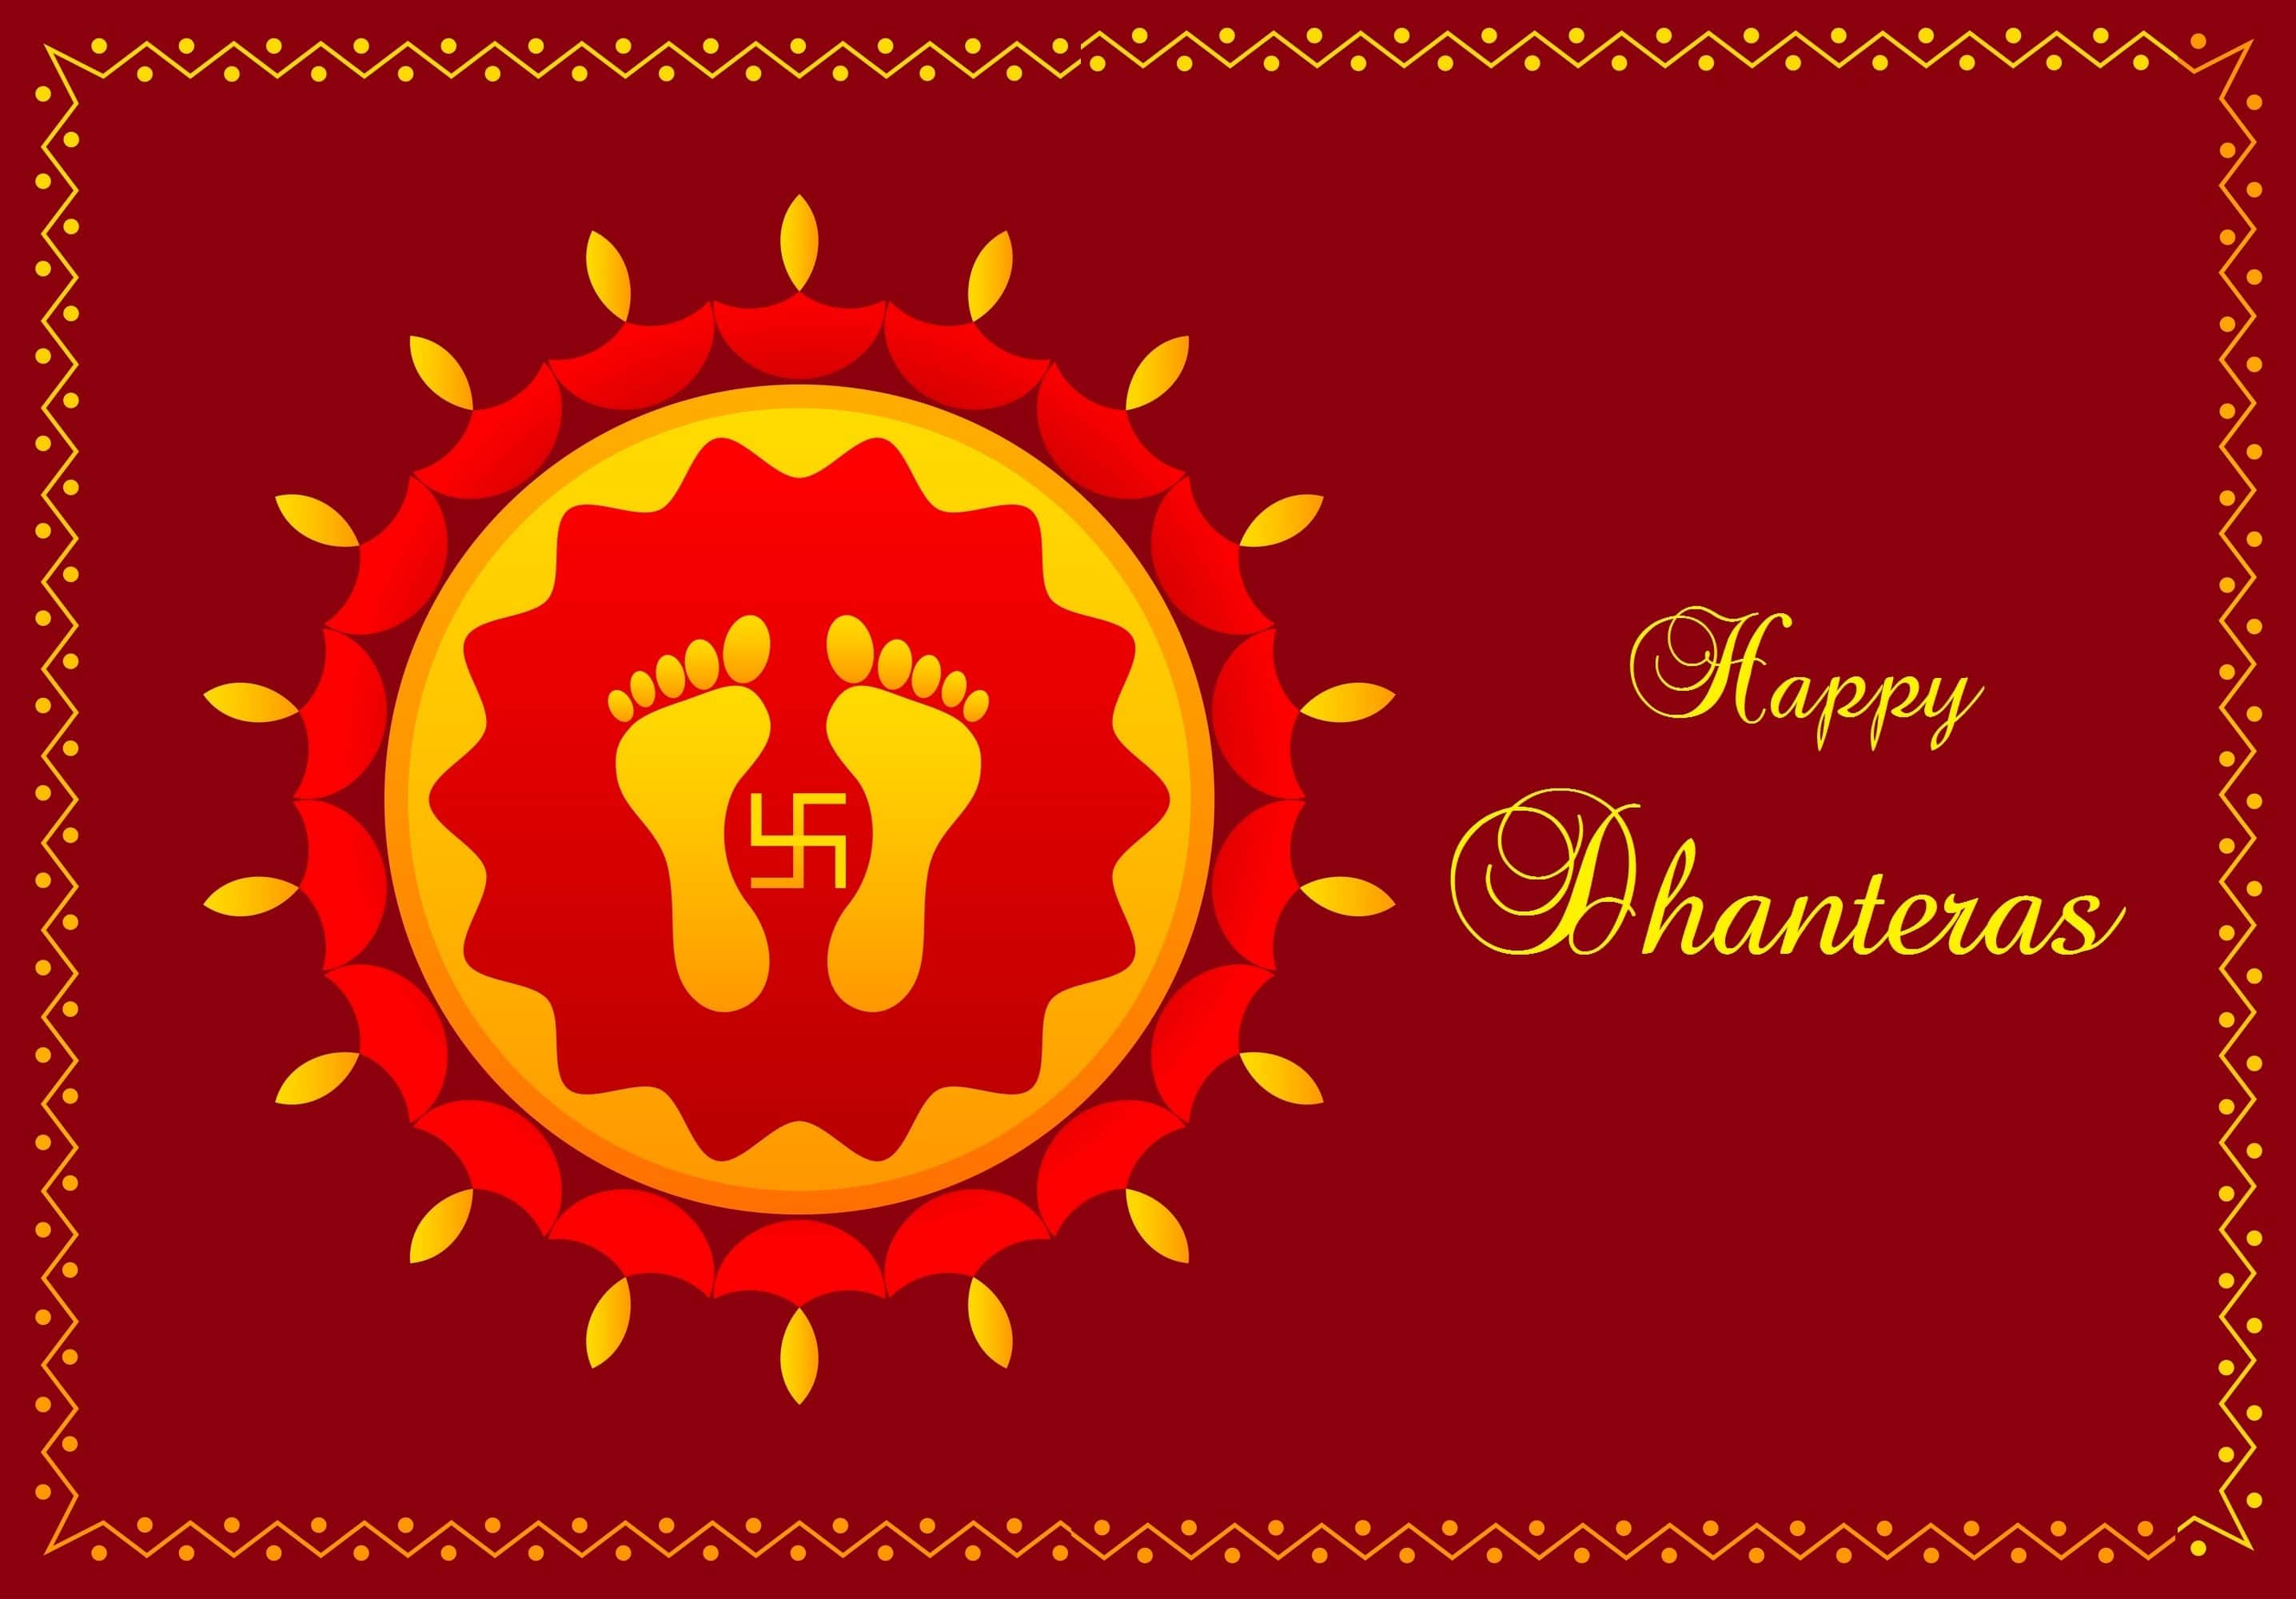 Happy Dhanteras Image, Photo, Wallpaper and Picture of 2018